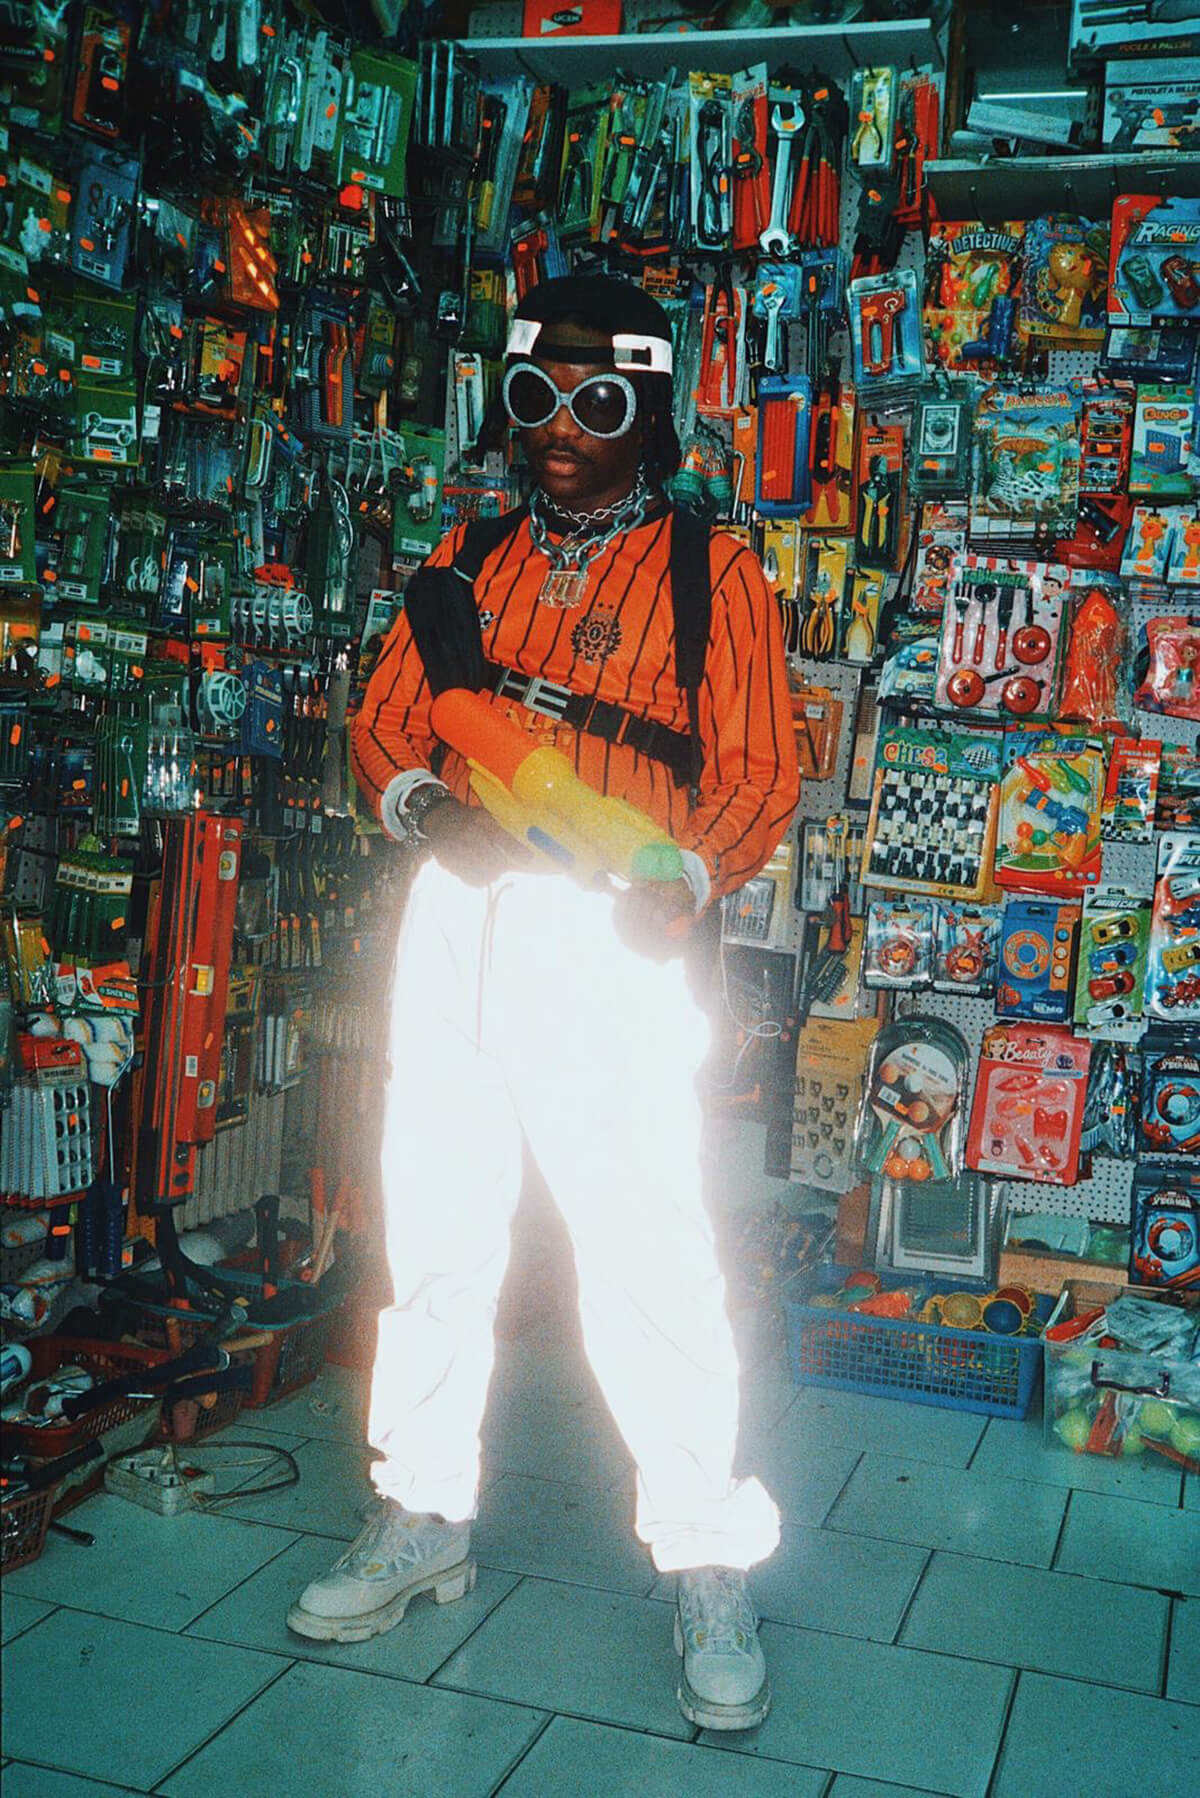 Jean-Yves Diallo is a Parisian street-style star, creative director and model who runs the Instagram account @Neptunes2000